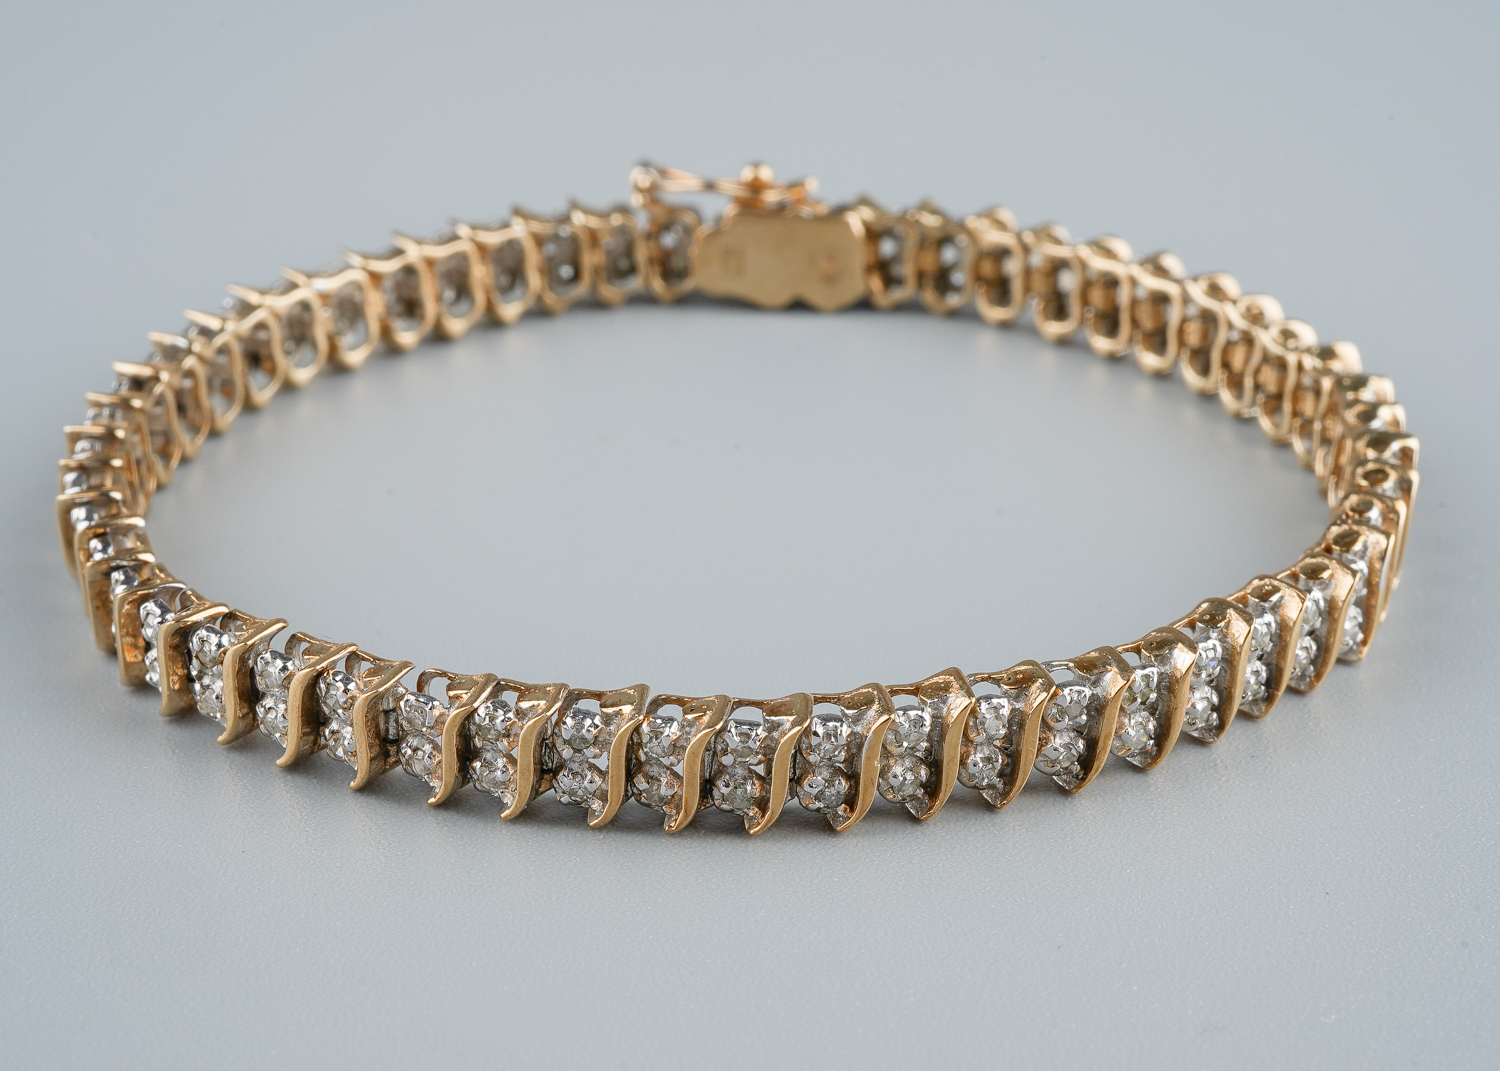 A 9ct gold and diamond line bracelet, with two round brilliant-cut diamond set links between S